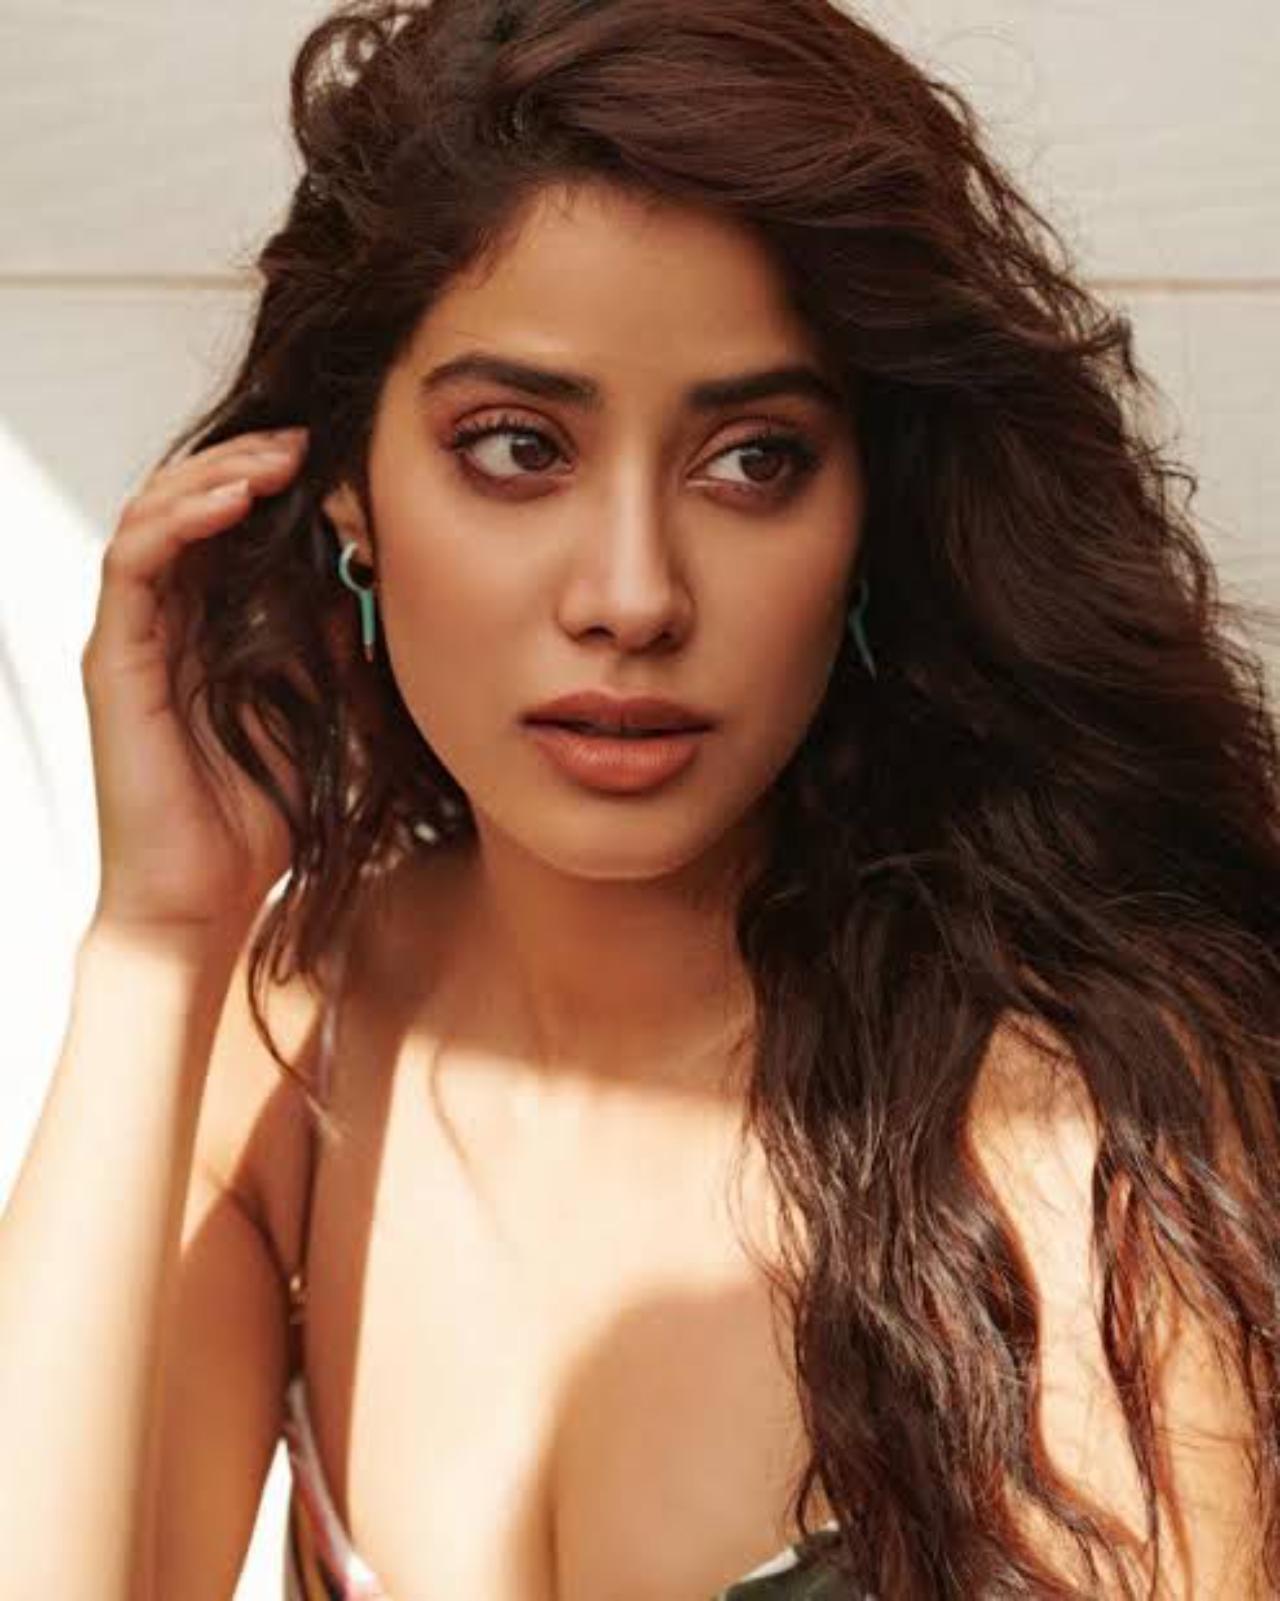 Janhvi Kapoor
The Genz star who is known as one of the most fashionable and stylish diva too has proved to be a soul who believes in a sustainable fashion. The youth inspiration has been seen repeating her outfits at various gatherings. The actress has proved by putting out that it’s not always the new tagged clothes that run the fashion game